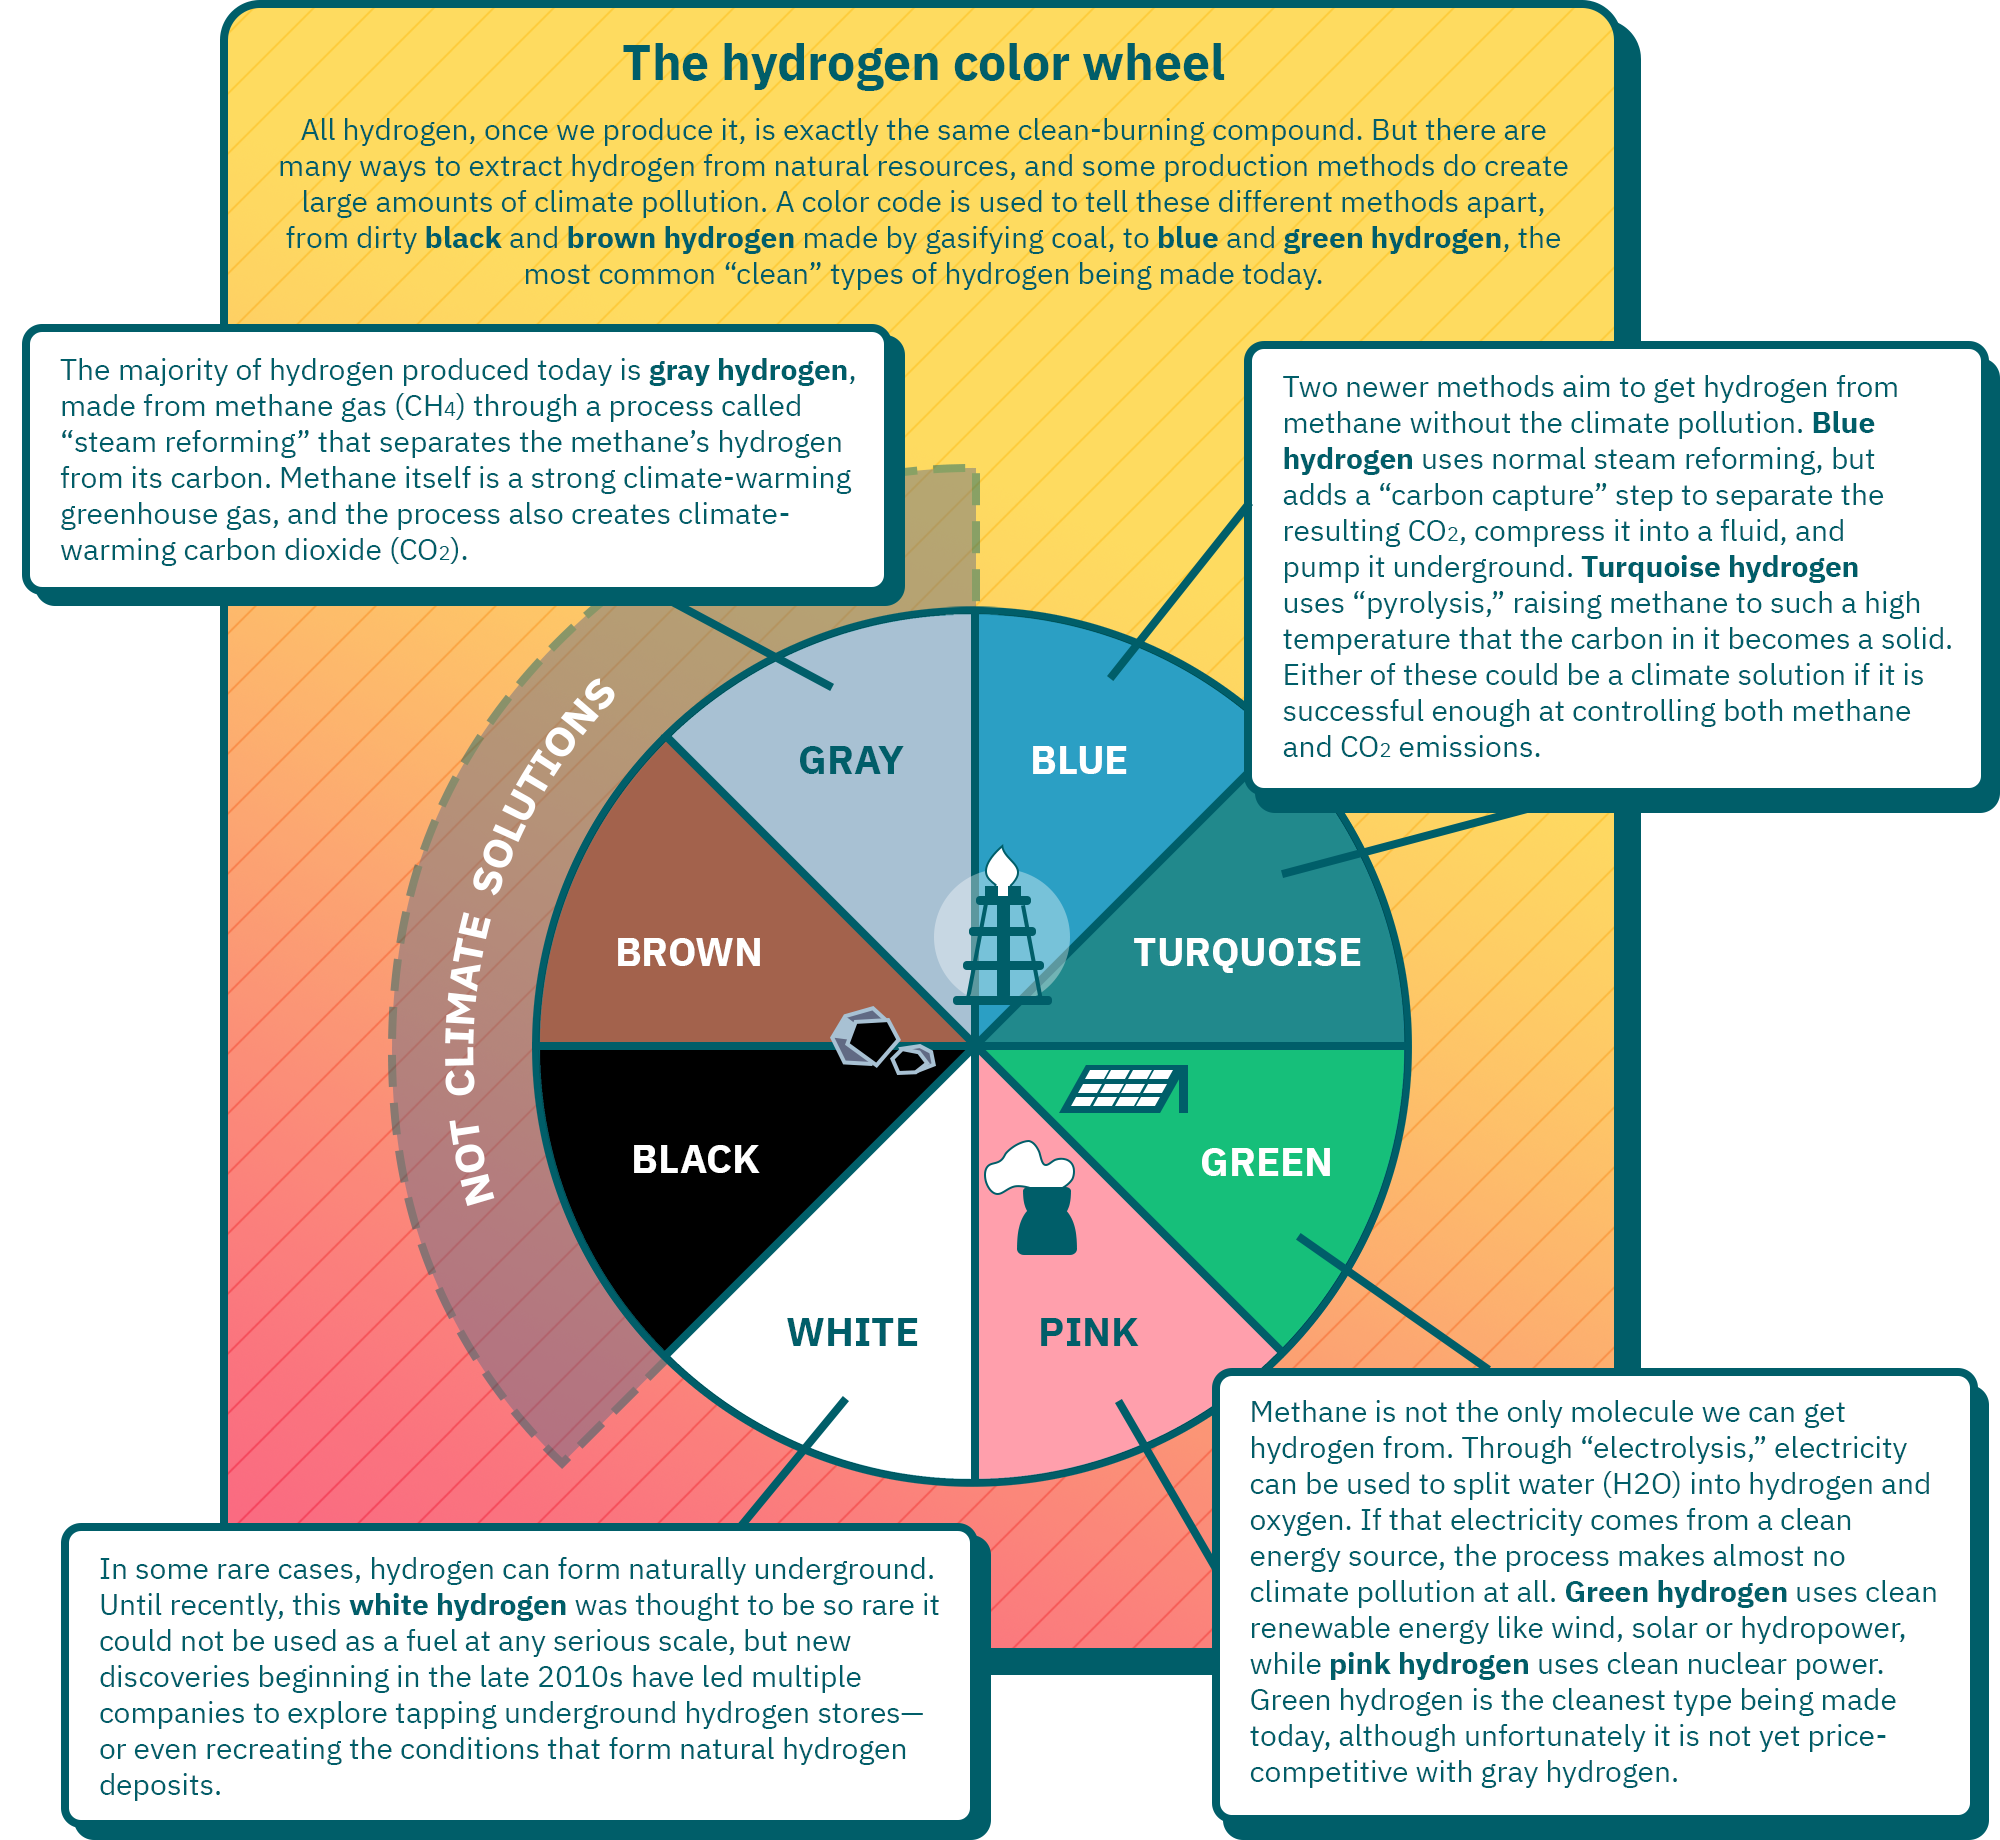 The hydrogen color wheel: All hydrogen, once we produce it, is exactly the same clean-burning compound. But there are many ways to extract hydrogen from natural resources, and some production methods do create large amounts of climate pollution. A color code is used to tell these different methods apart, from dirty black and brown hydrogen made by gasifying coal, to blue and green hydrogen, the most common “clean” types of hydrogen being made today.